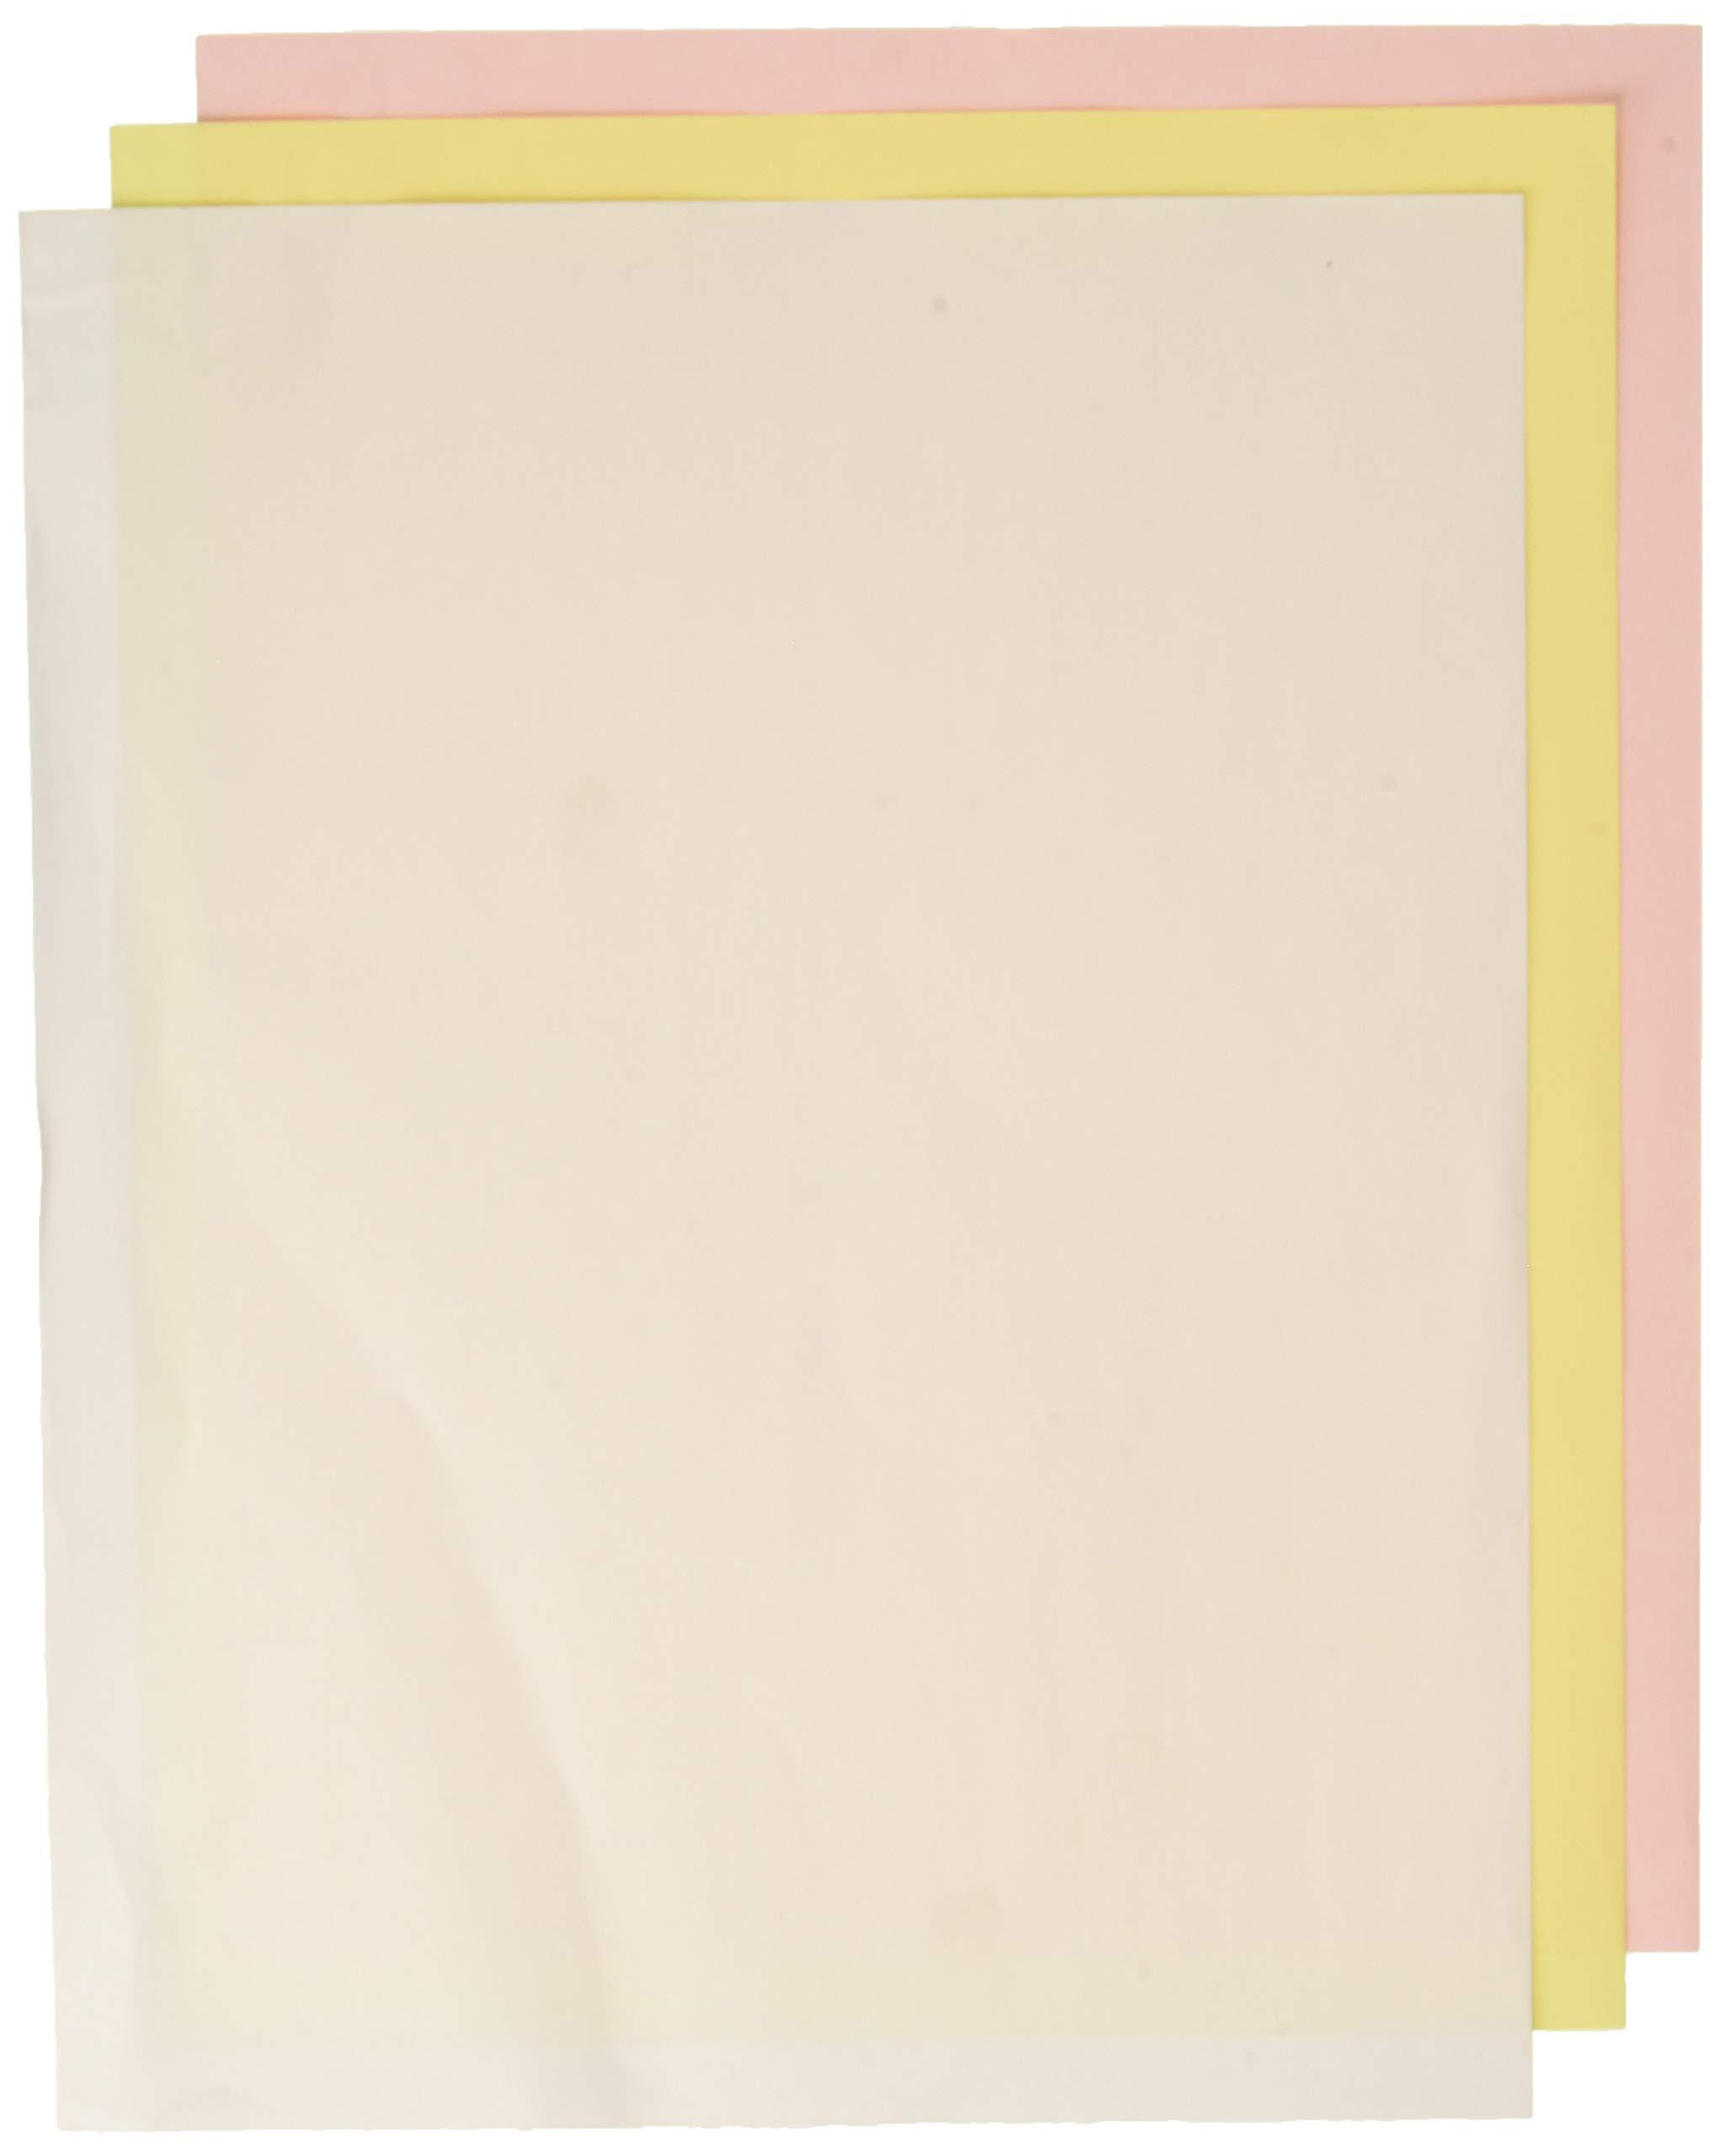 nekoosa fast pack carbonless 3-part paper, 8.5 x 11, pink/canary/white, 500 sheets/ream, 5 reams/carton